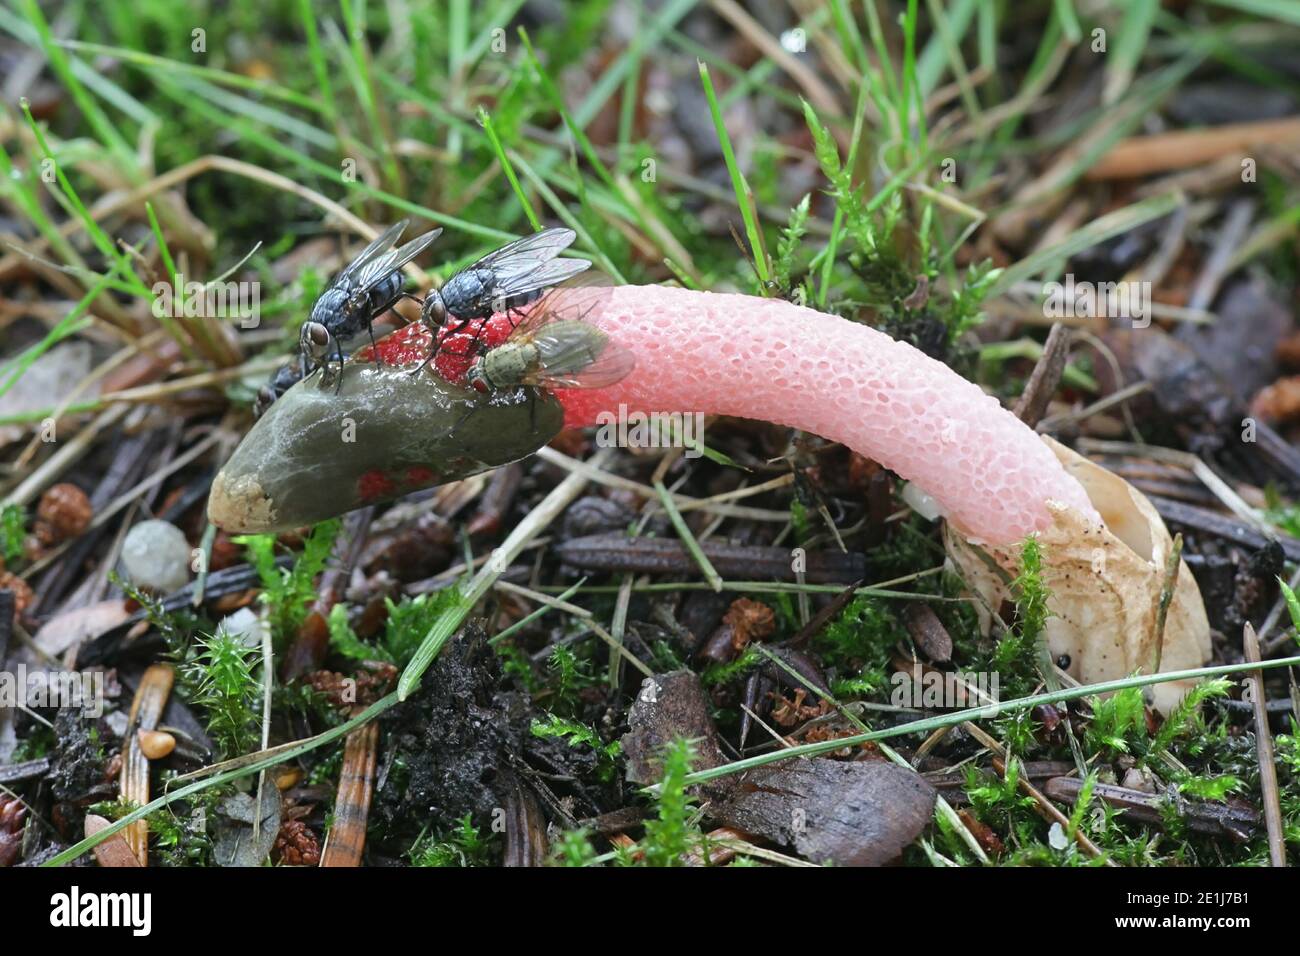 Mutinus ravenelii, known as the red stinkhorn fungus, stinking mushrooms from Finland Stock Photo